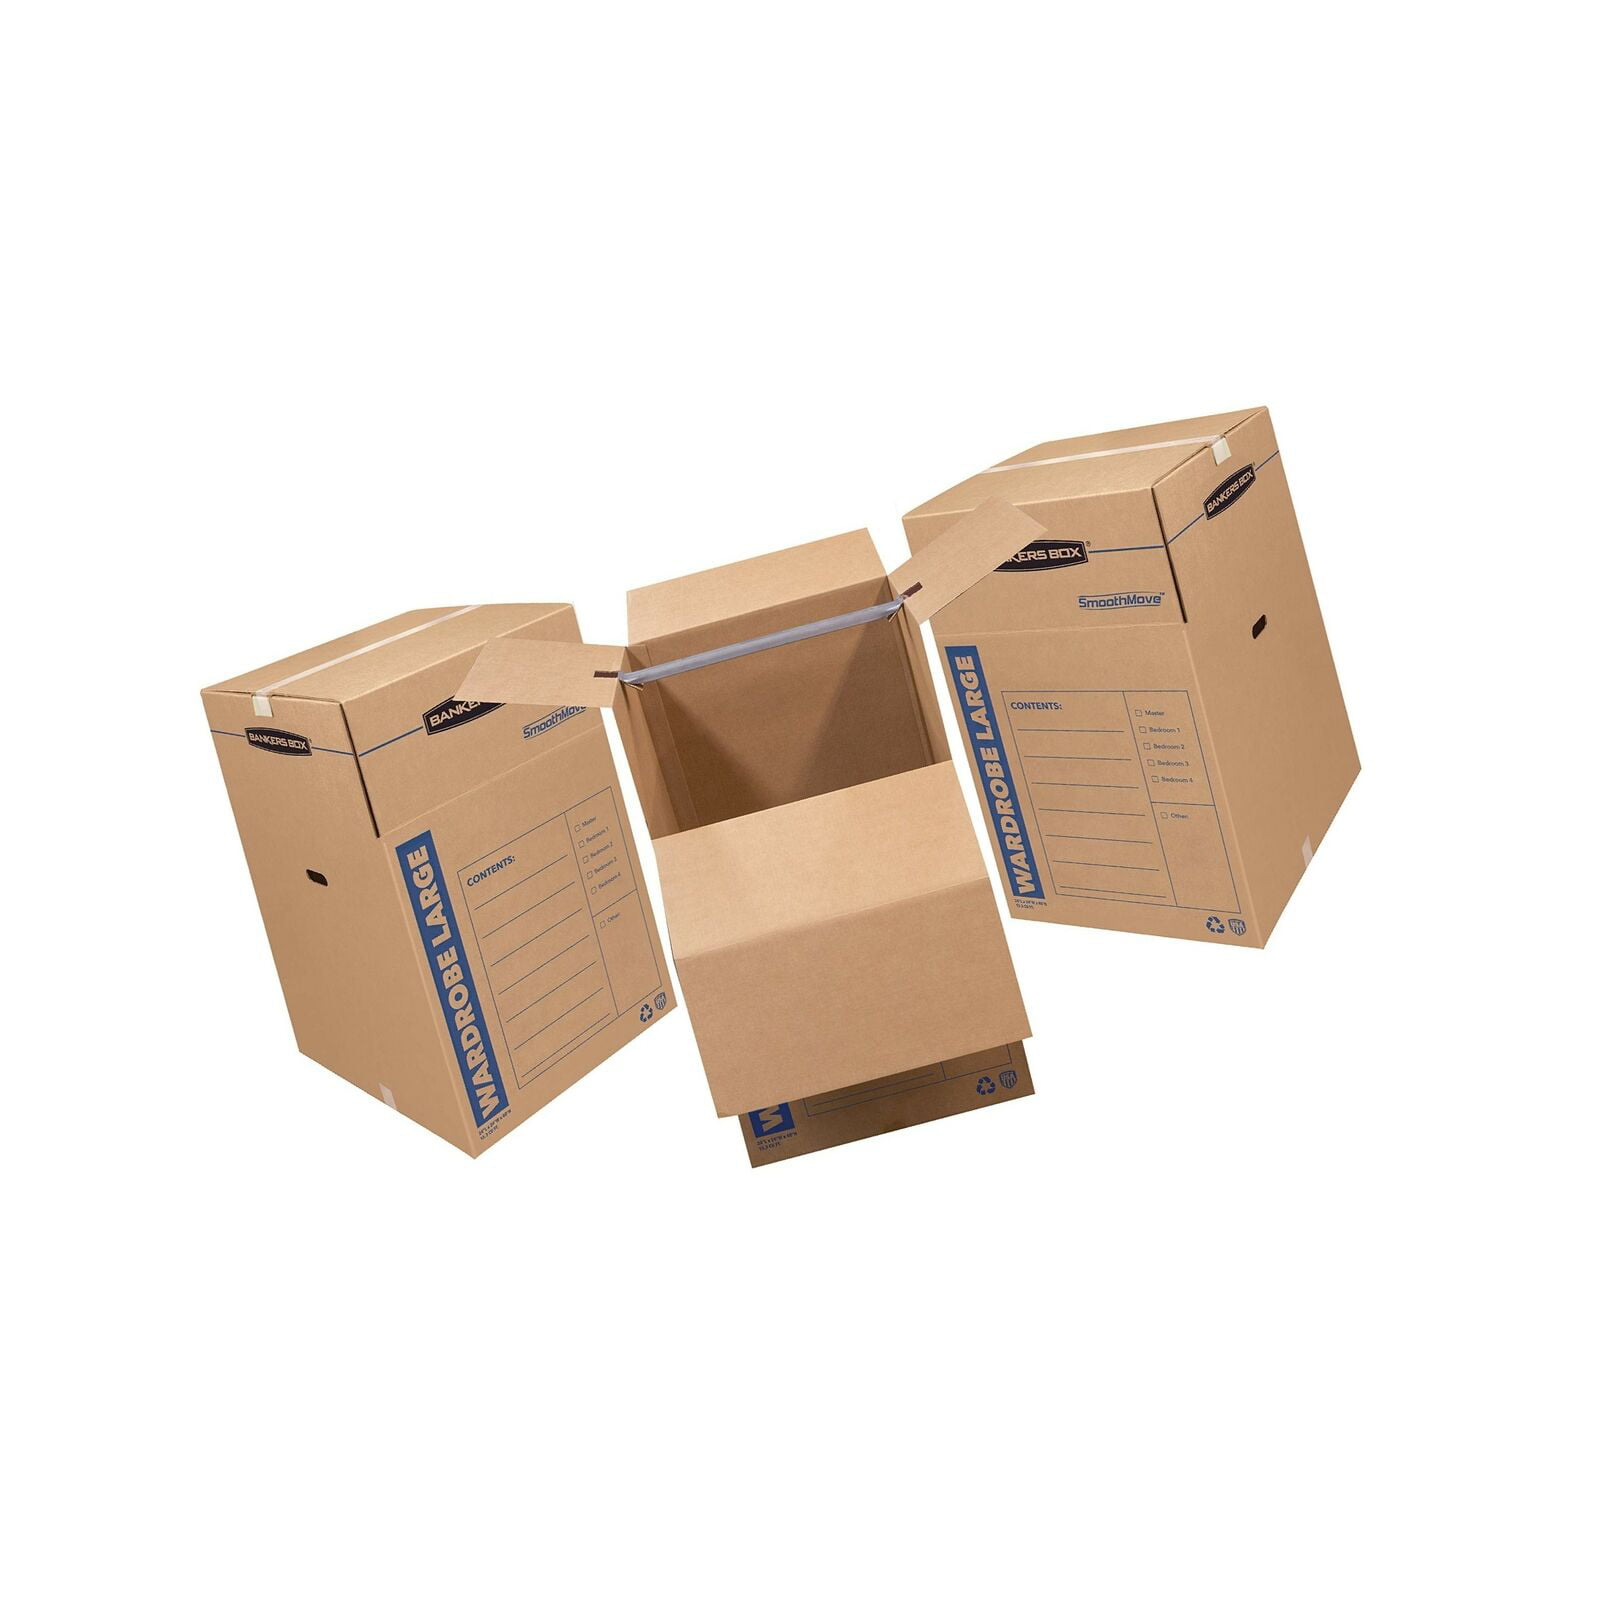 3 Pack Wardrobe Moving Boxes 24 x 24 x 40 Inches 7711001 Tall